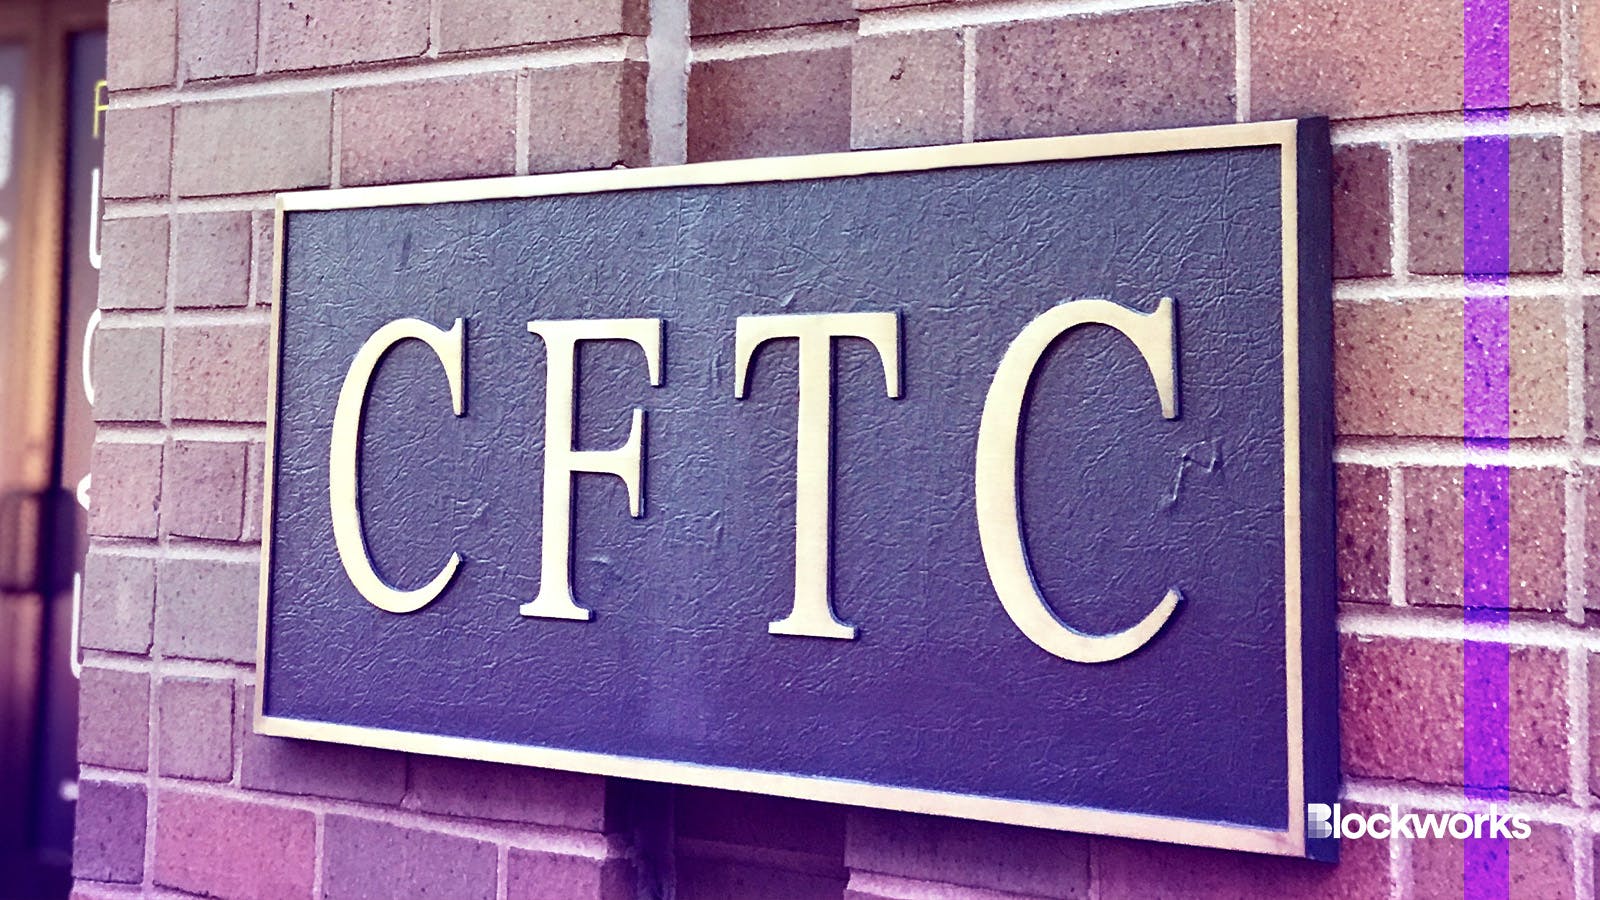 CFTC Calls ETH a Commodity in KuCoin Complaint (2 minute read)